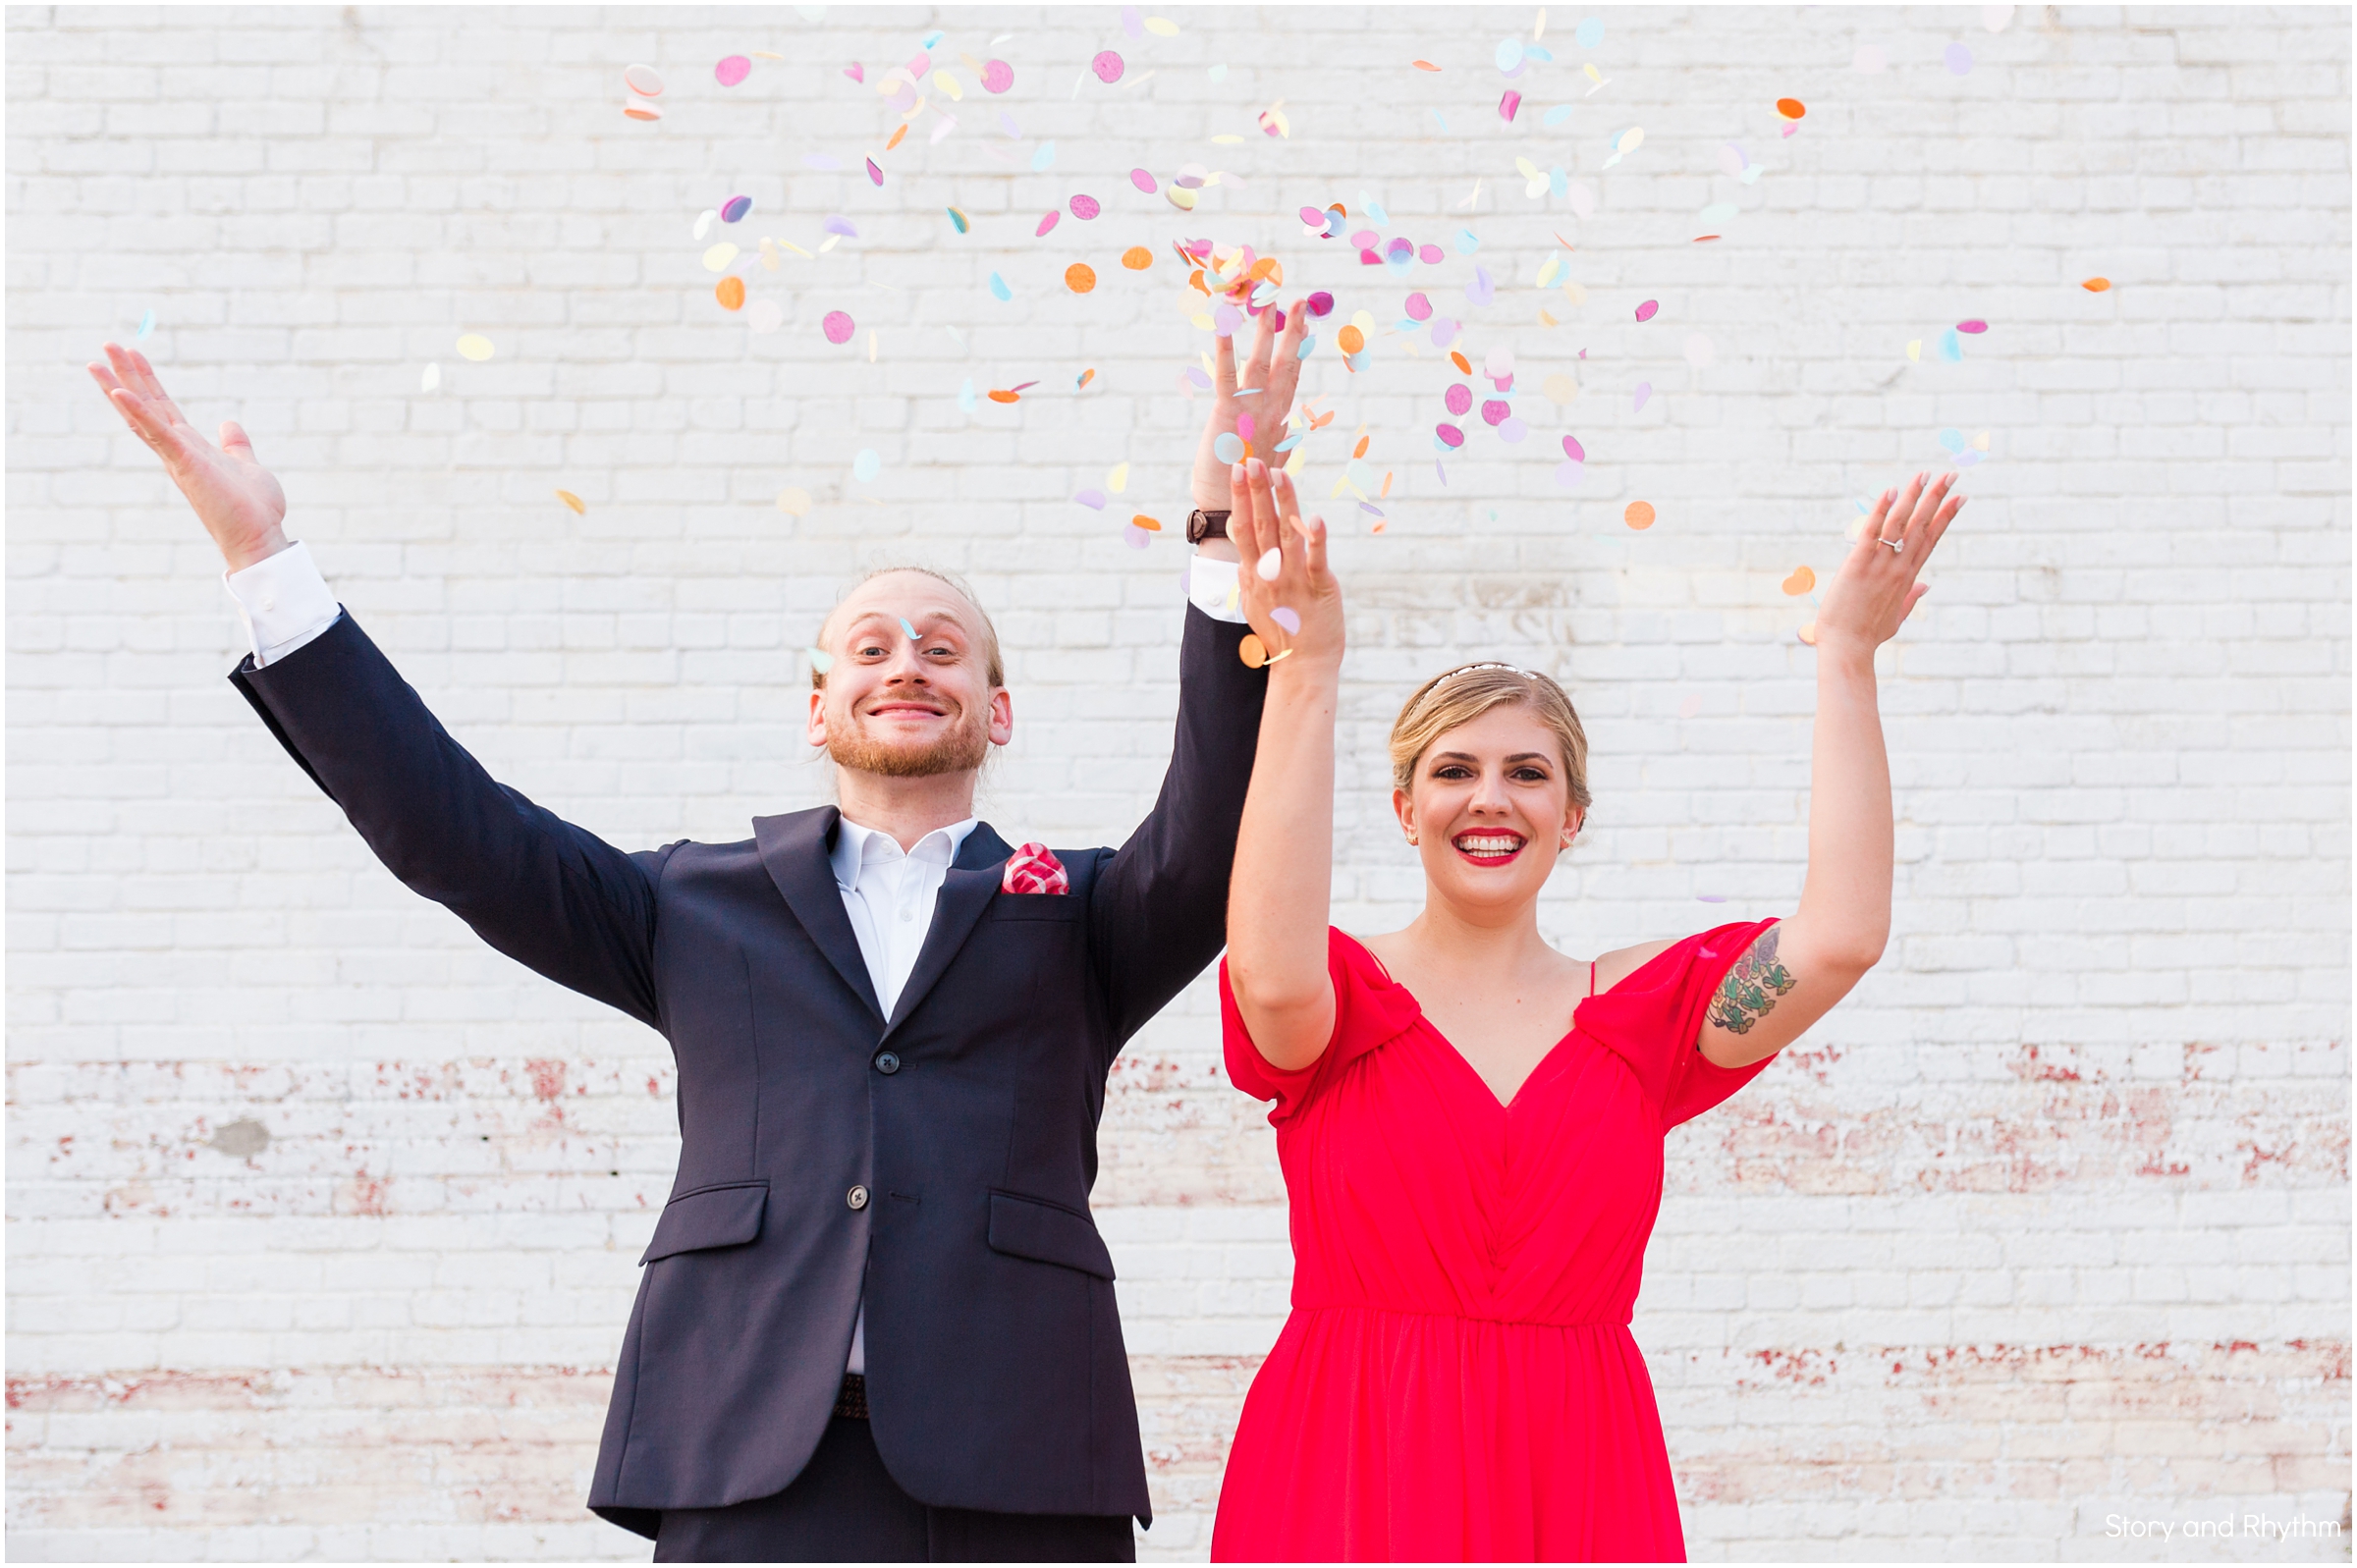 Fun engagement photo ideas with confetti